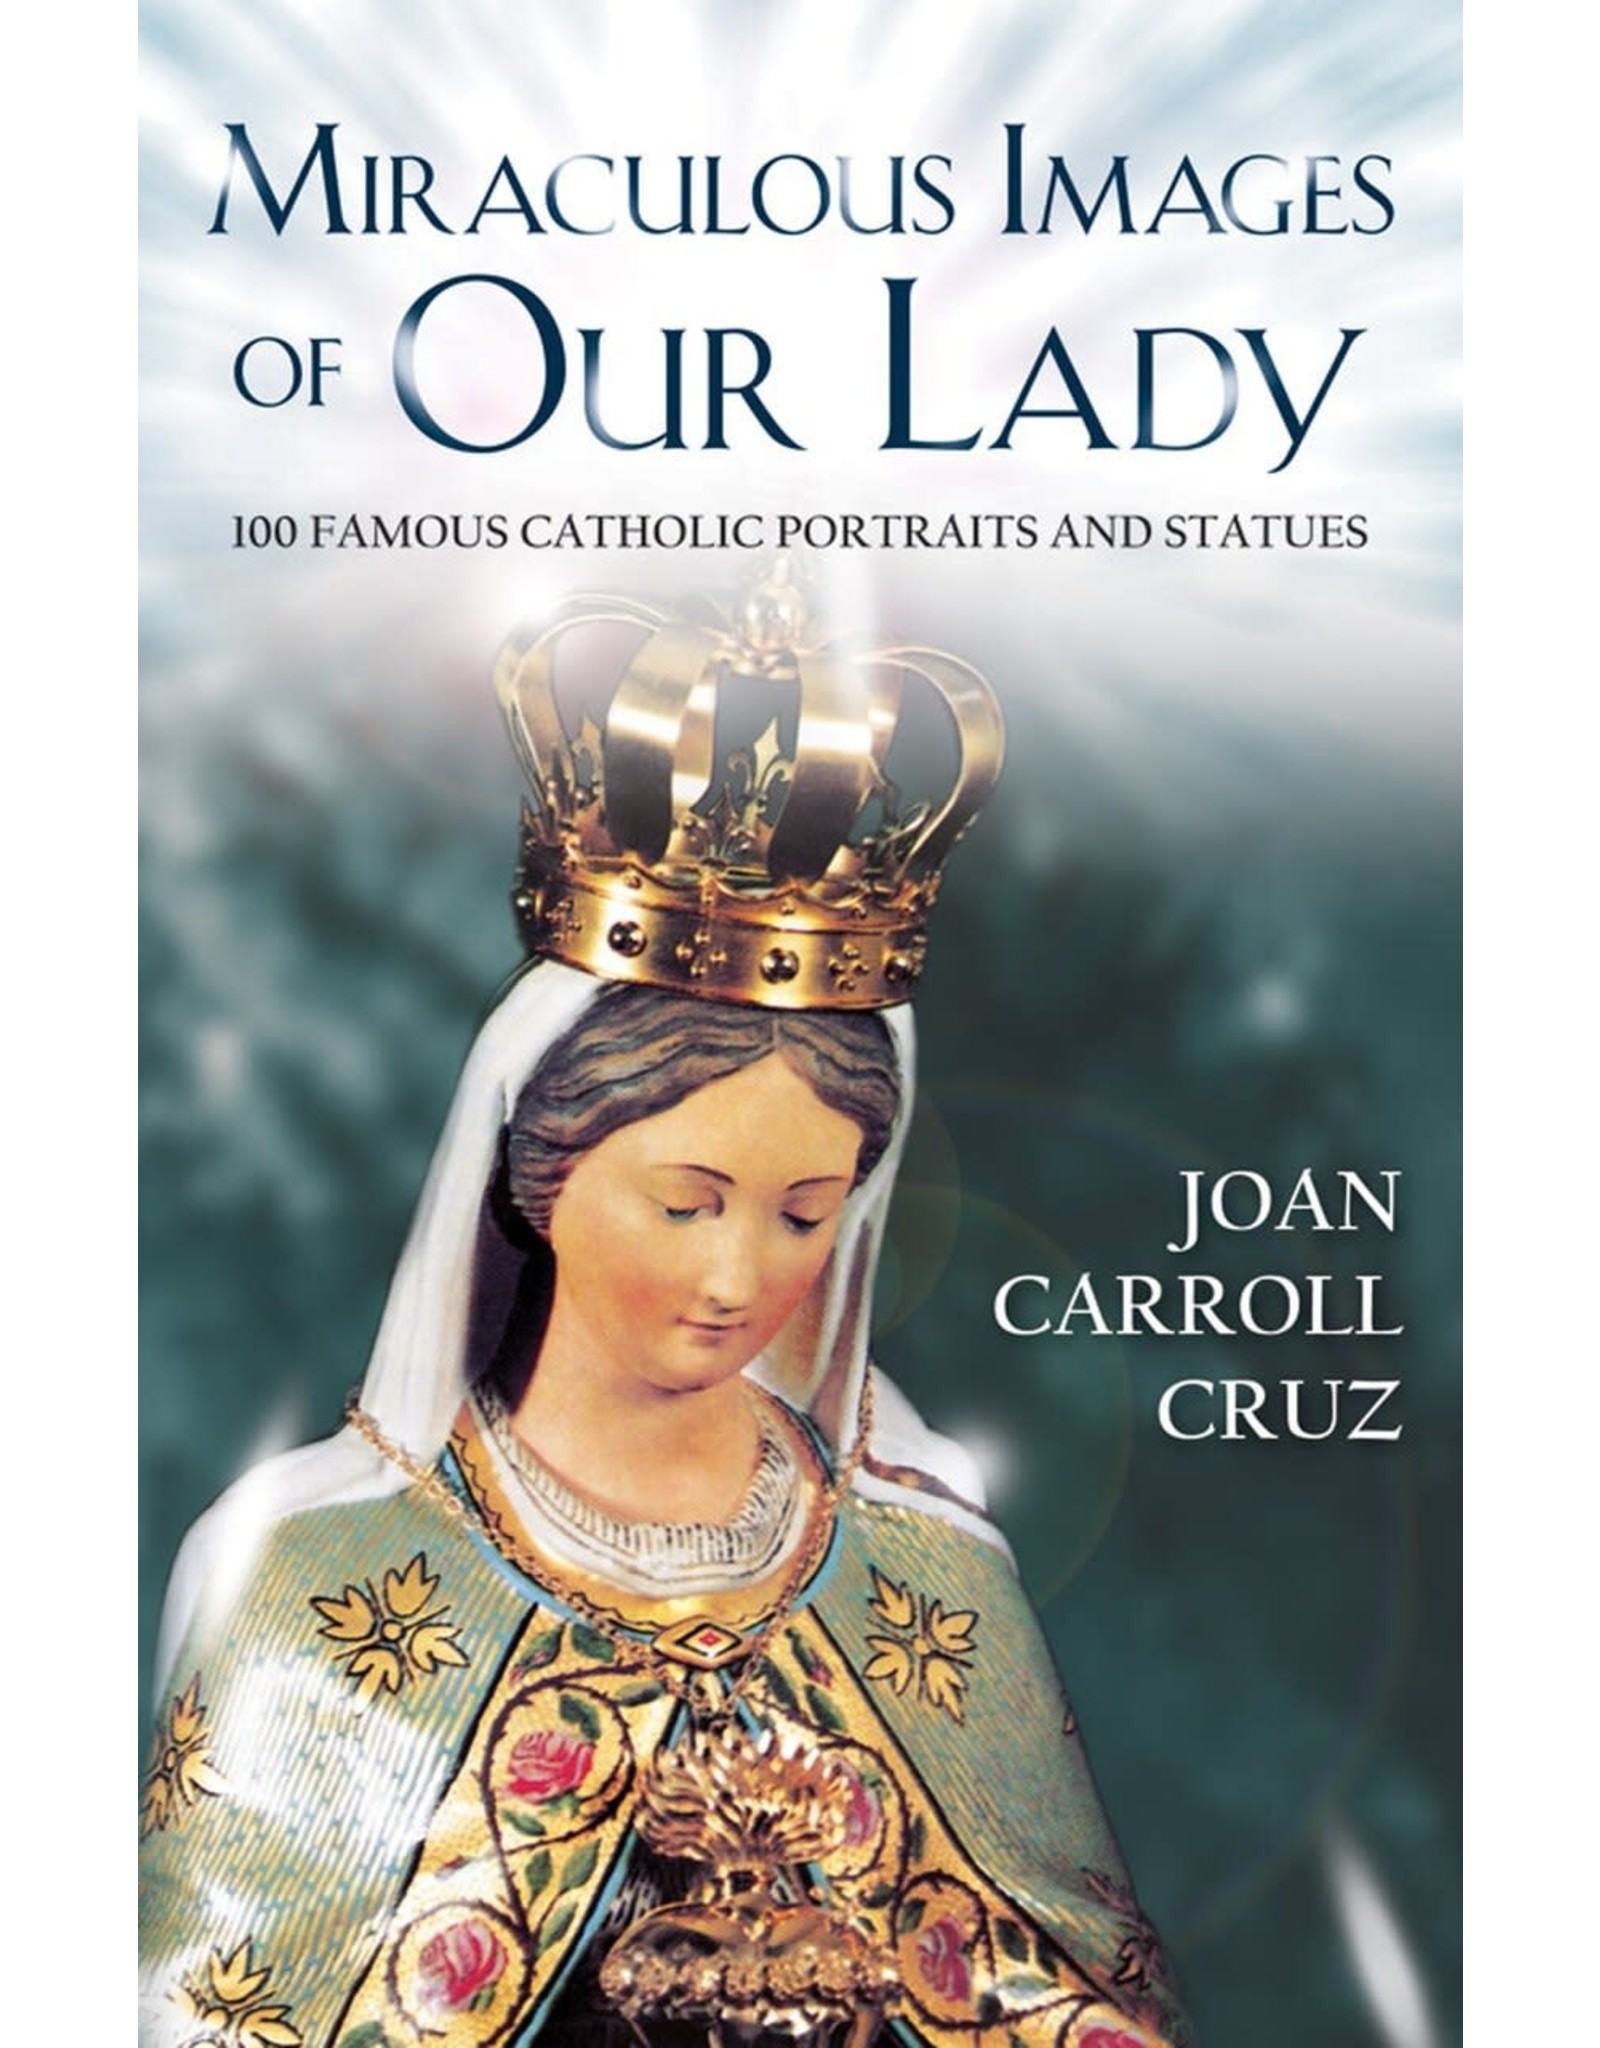 Tan Books Miraculous Images Of Our Lady: 100 Famous Catholic Portraits And Statues by Joan Carroll Cruz (Paperback)